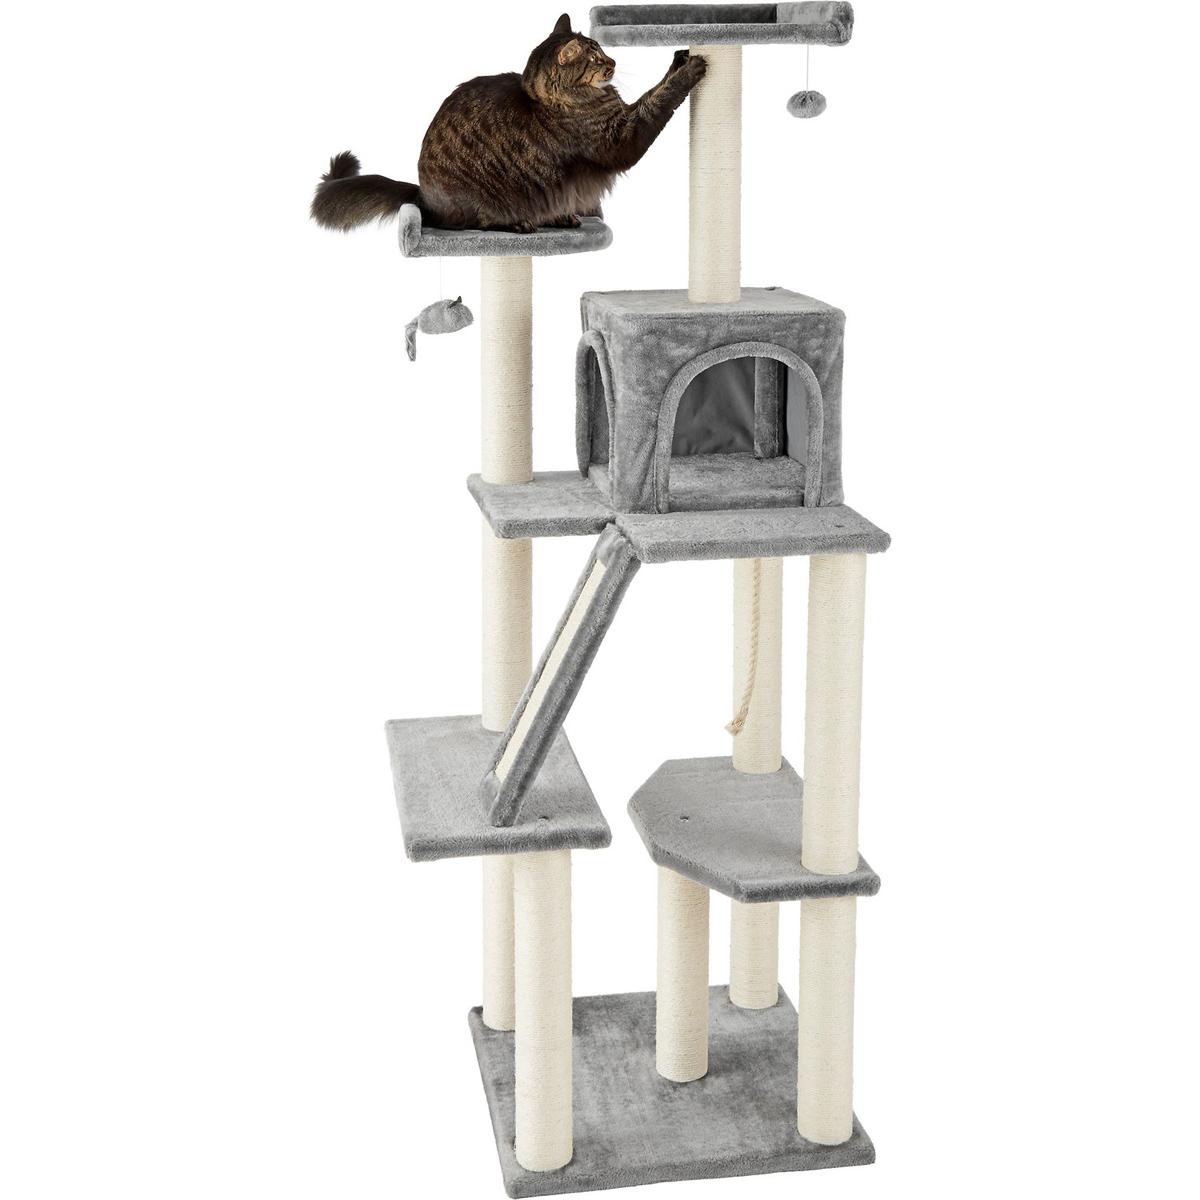 68in Frisco Faux Fur Cat Tree and Condo for $41.99 Shipped